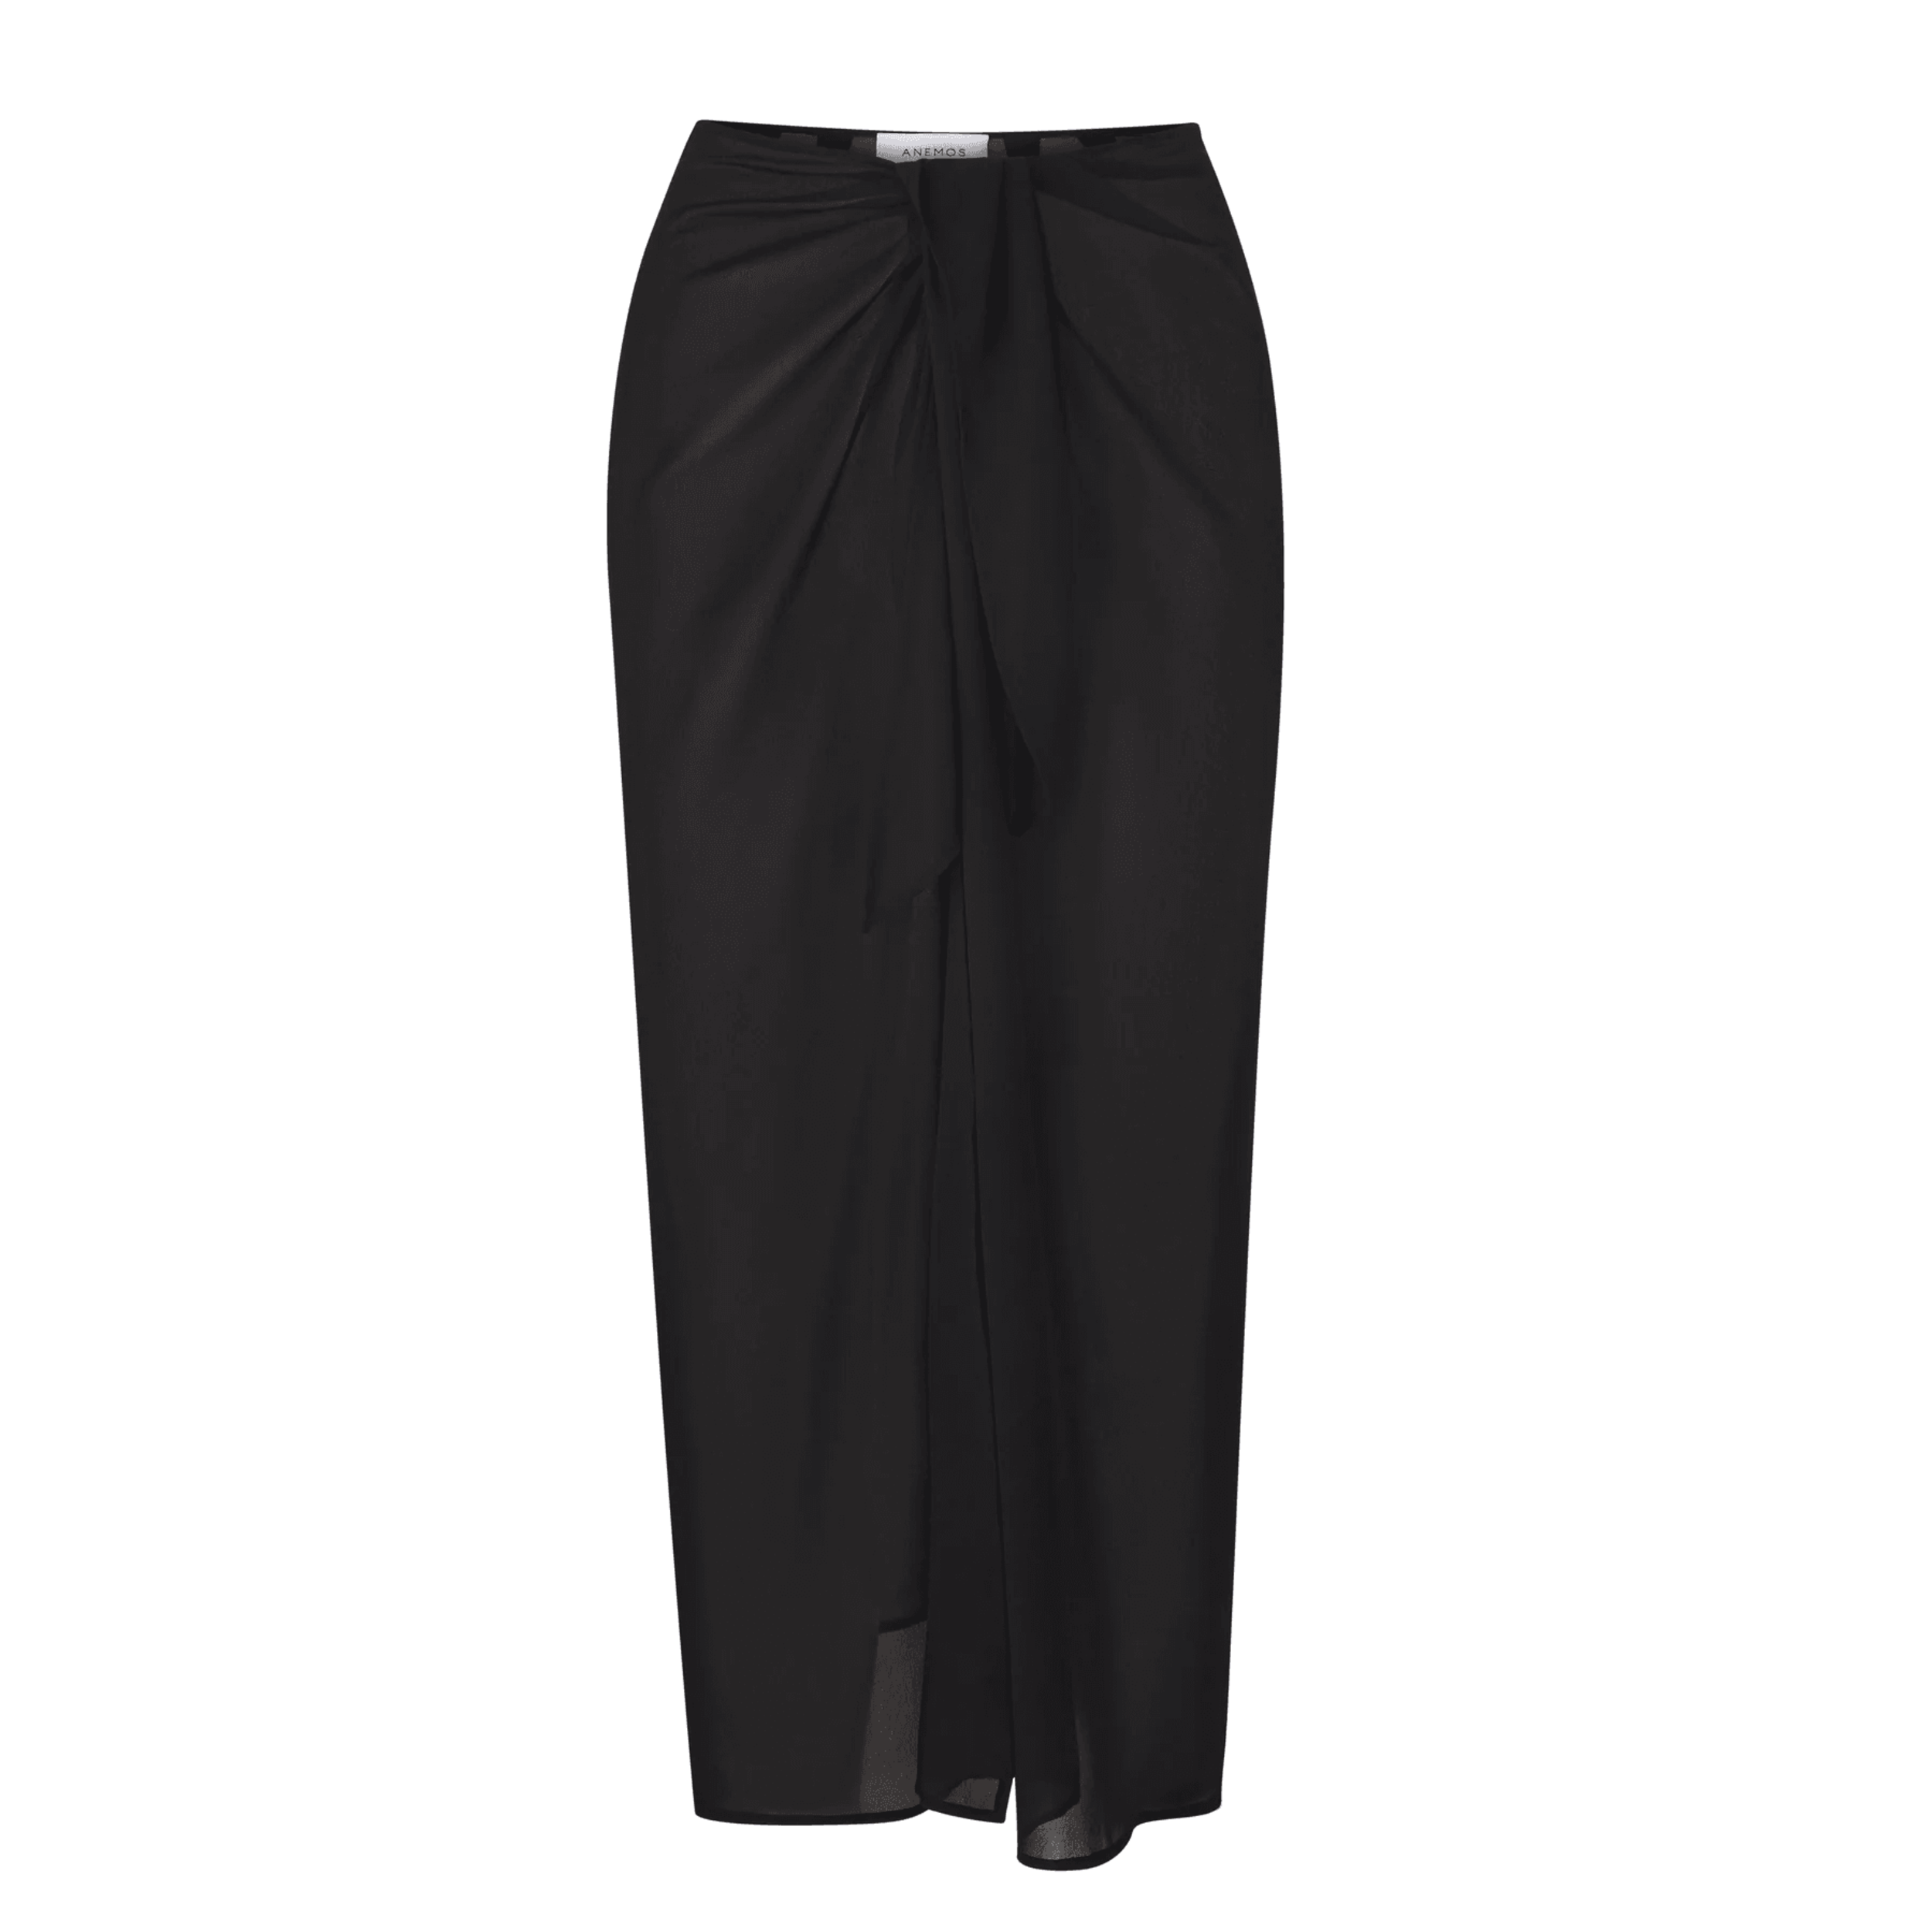 Anemos - The Wrap Midi Skirt Cover Up